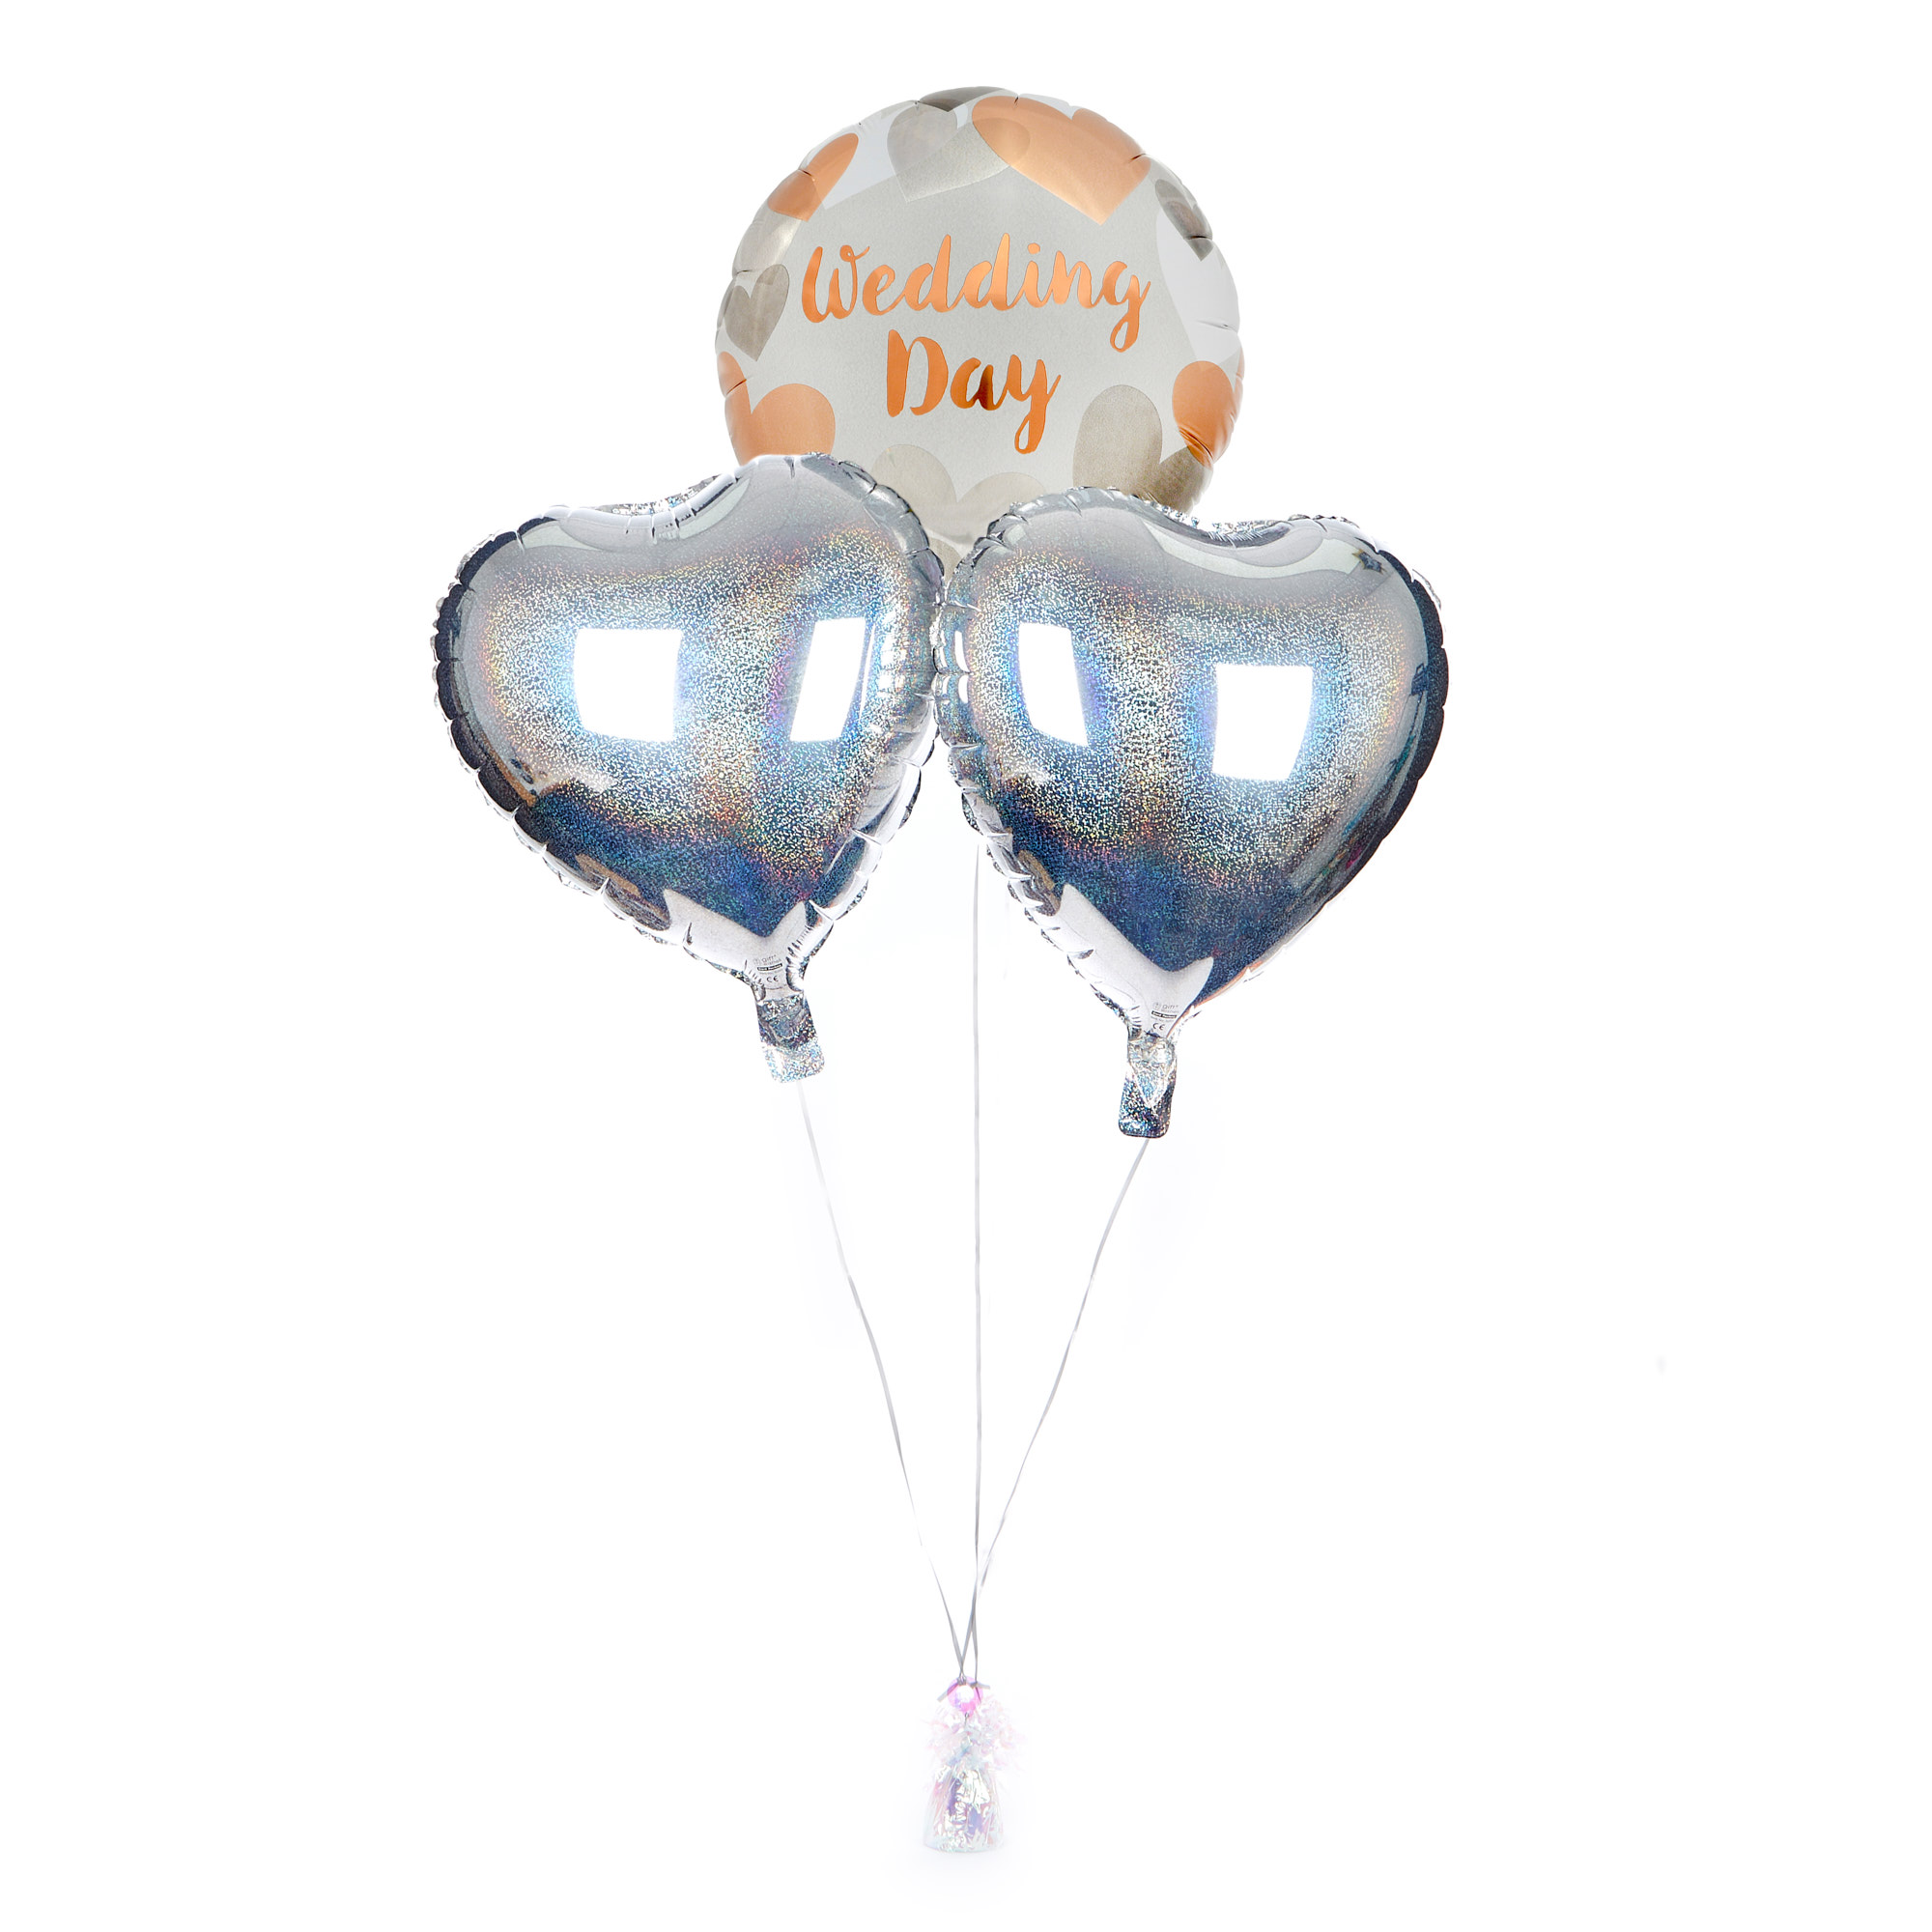 Wedding Day Balloon Bouquet - DELIVERED INFLATED!